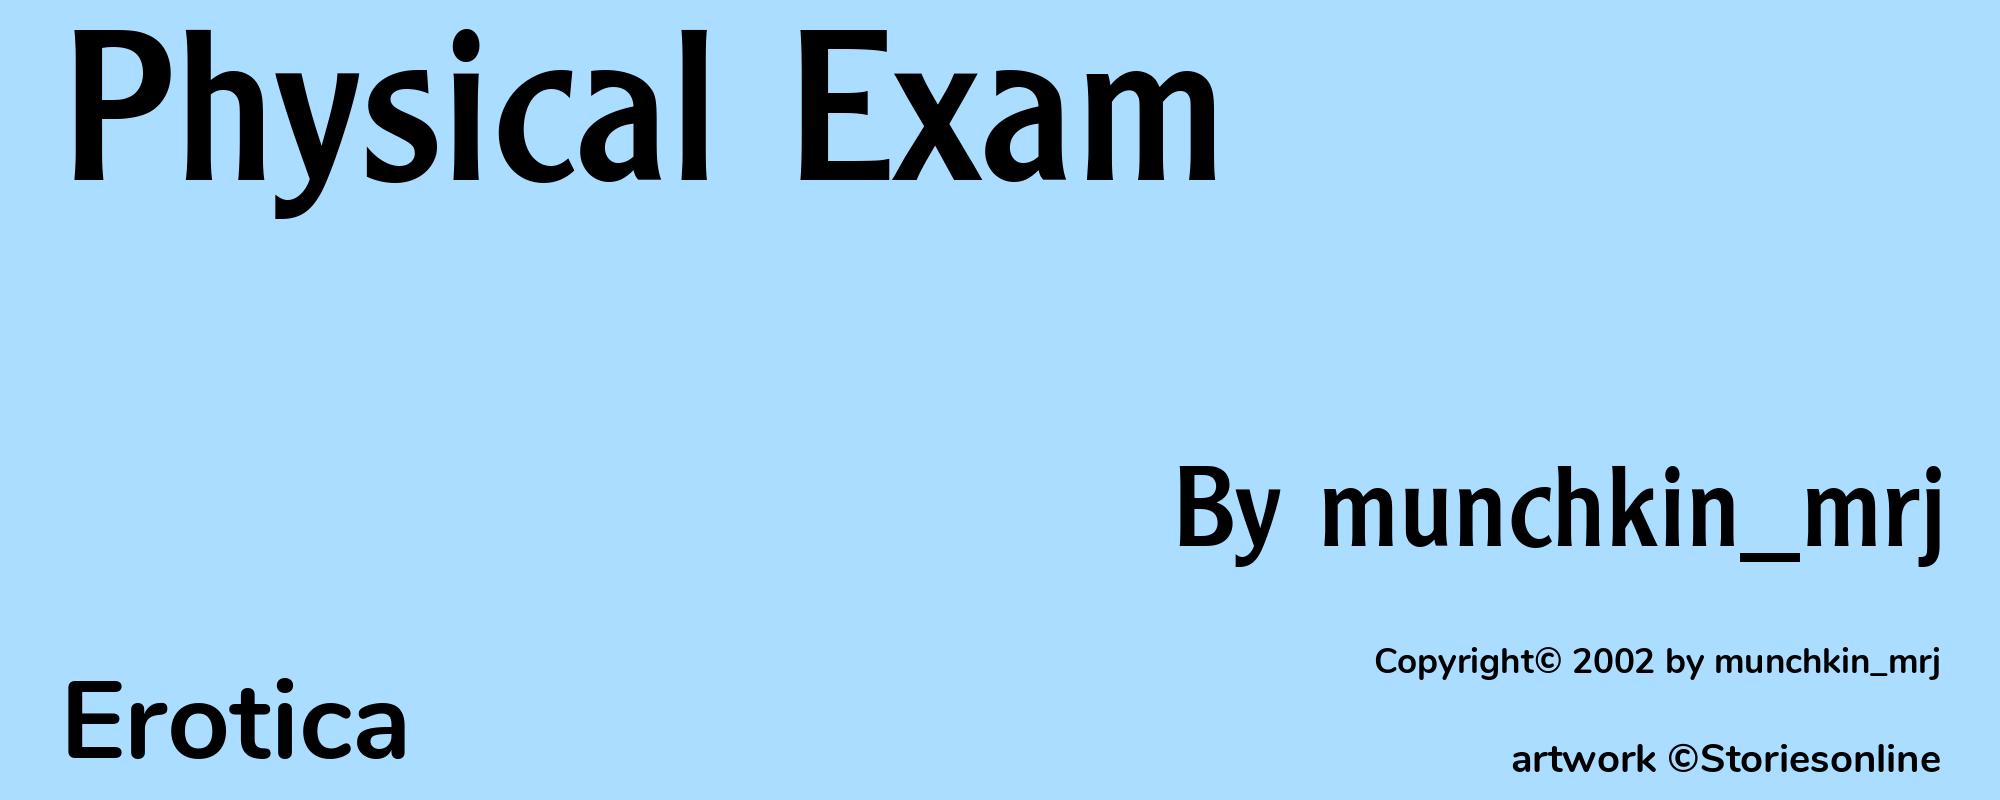 Physical Exam - Cover